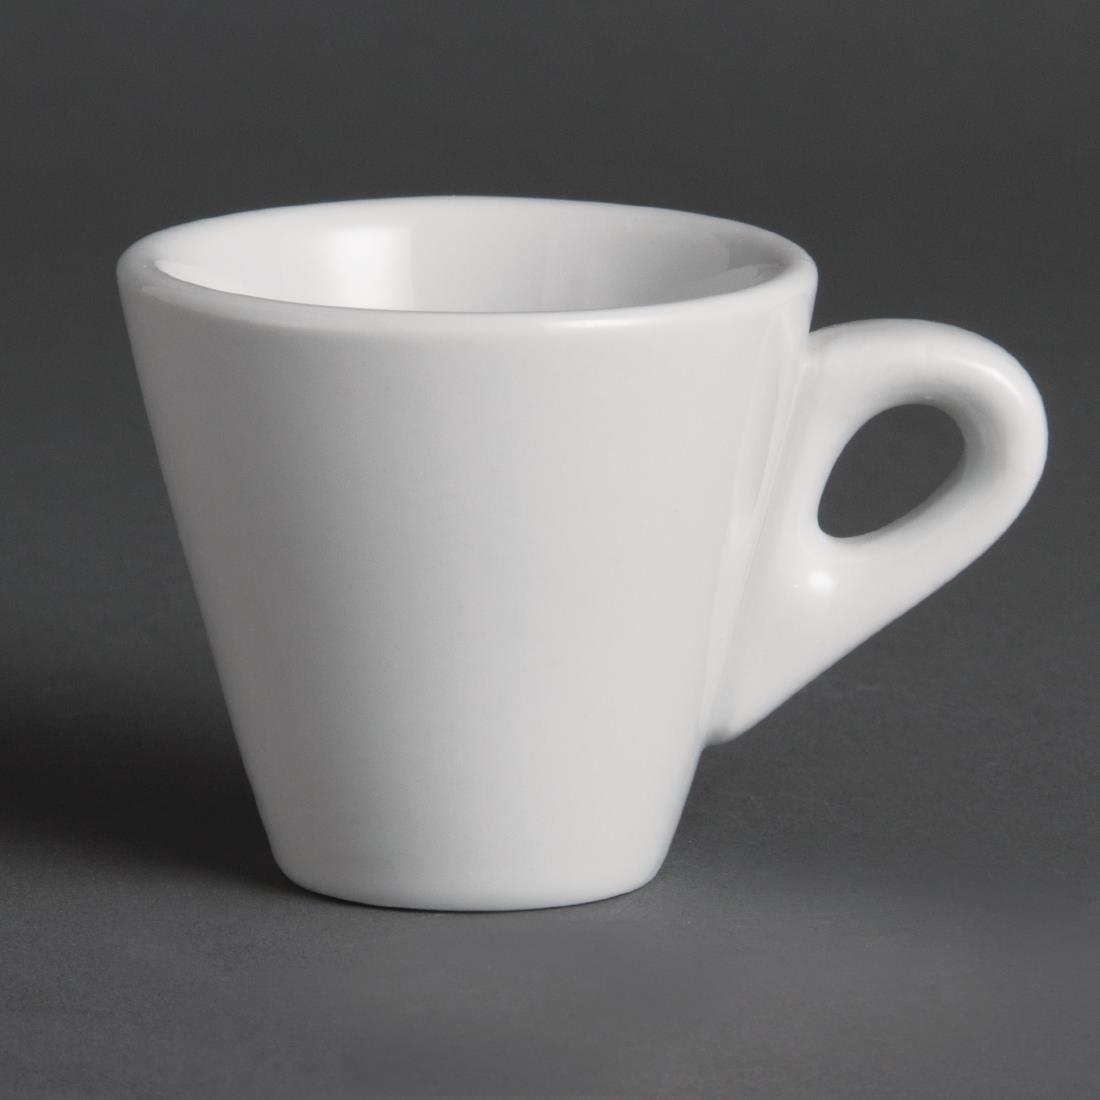 Olympia Whiteware Conical Espresso Cups 60ml  Pack quantity: 12